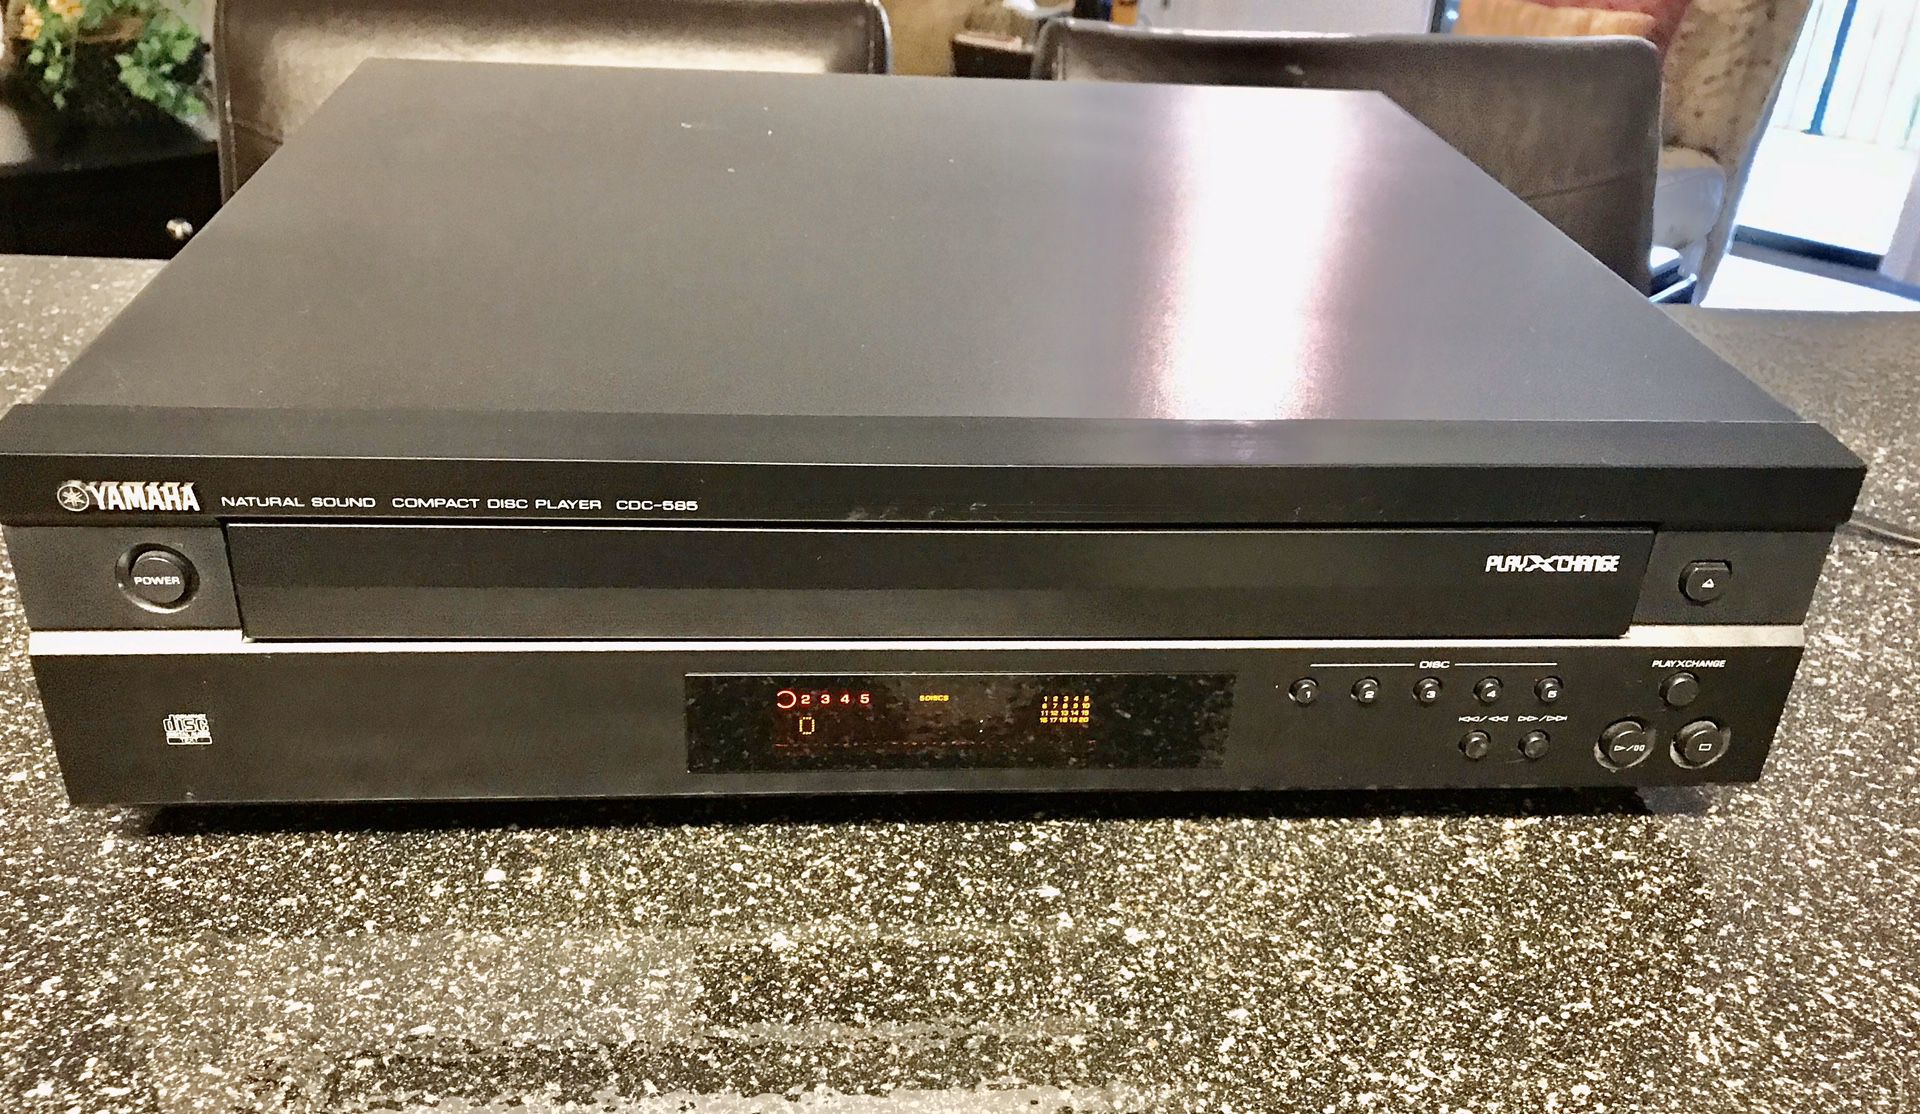 YAMAHA NATURAL SOUND 5 CD EXCHANGER IN EXCELLENT CONDITION